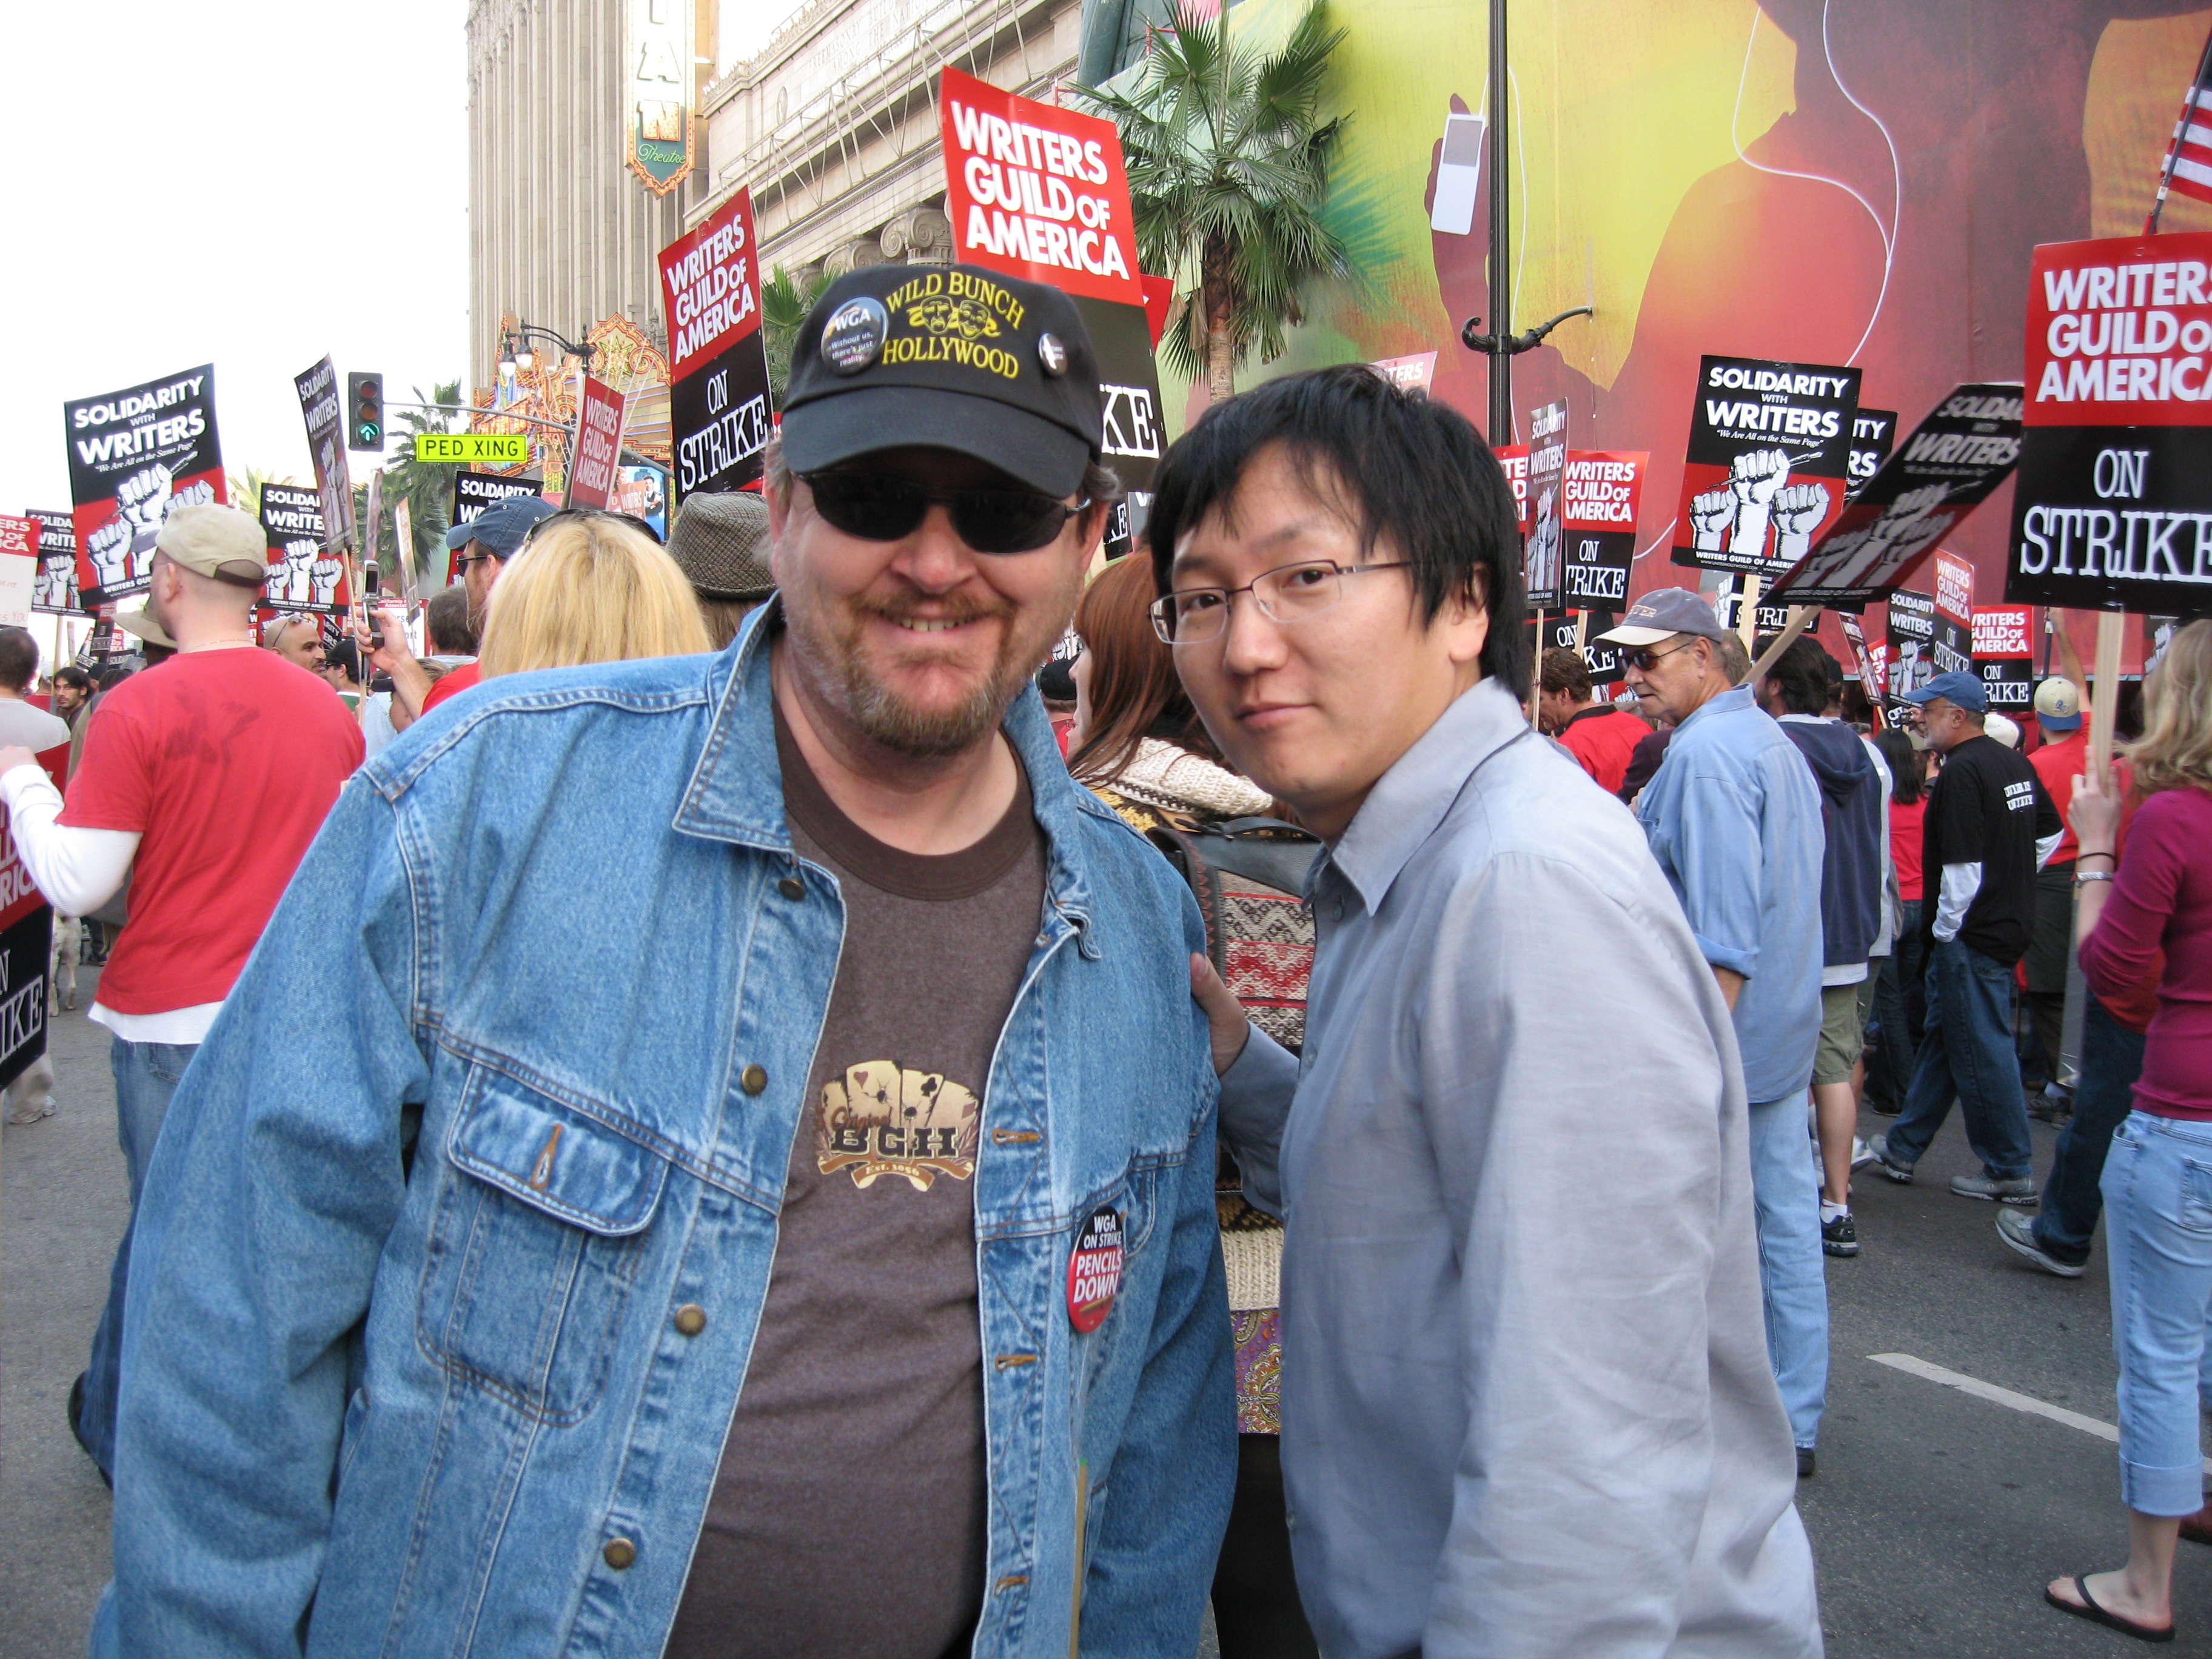 Gregory Schmauss with Masi Oka at the WGA Writer's Rally event in Hollywood, California.